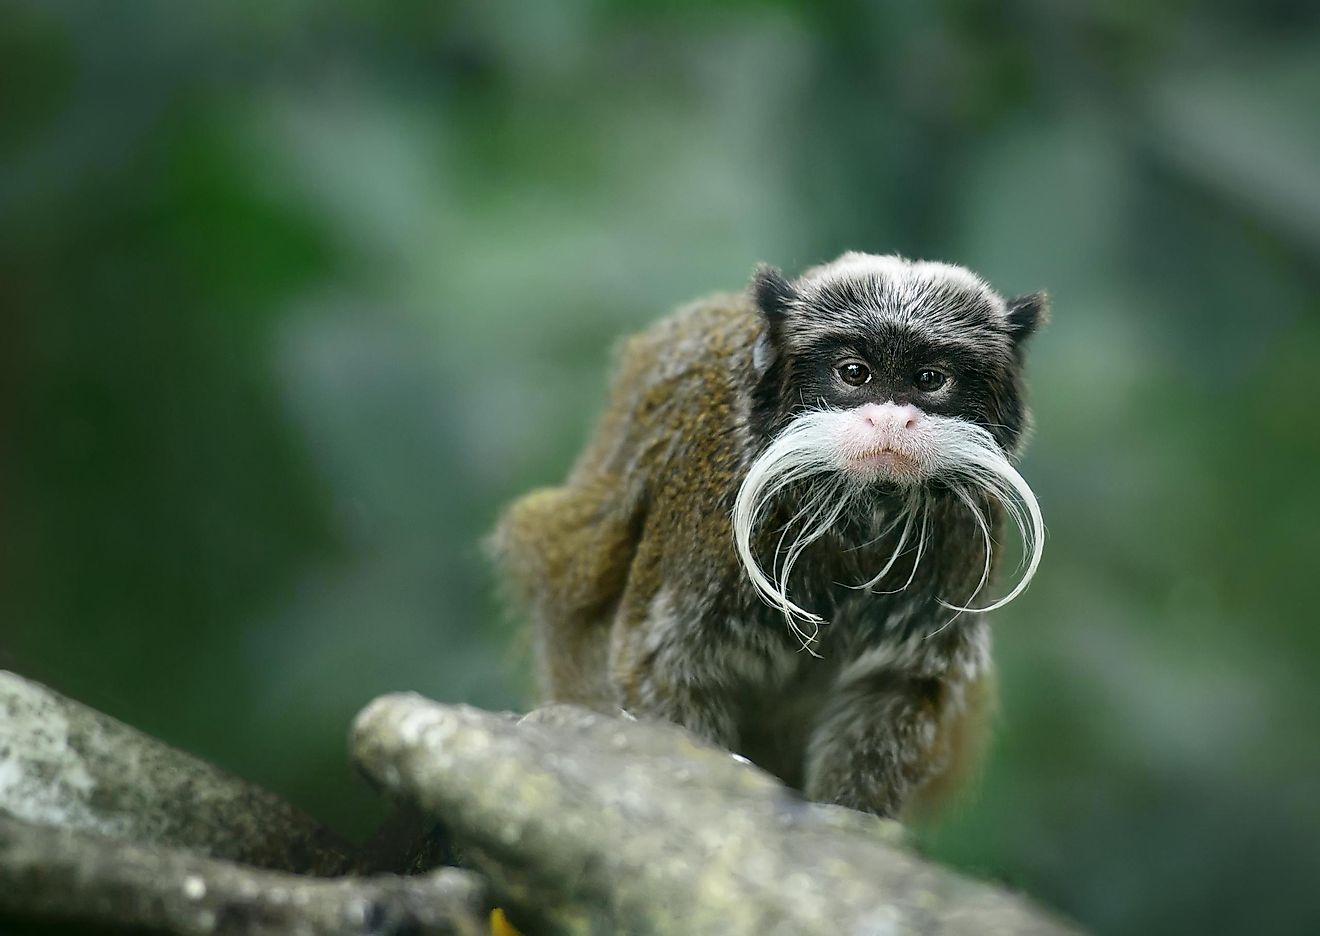 The Bearded Emperor Tamarin is famous for its iconic whiskers, which are said to resemble the facial hair of Wilhelm II, the last emperor of Germany.